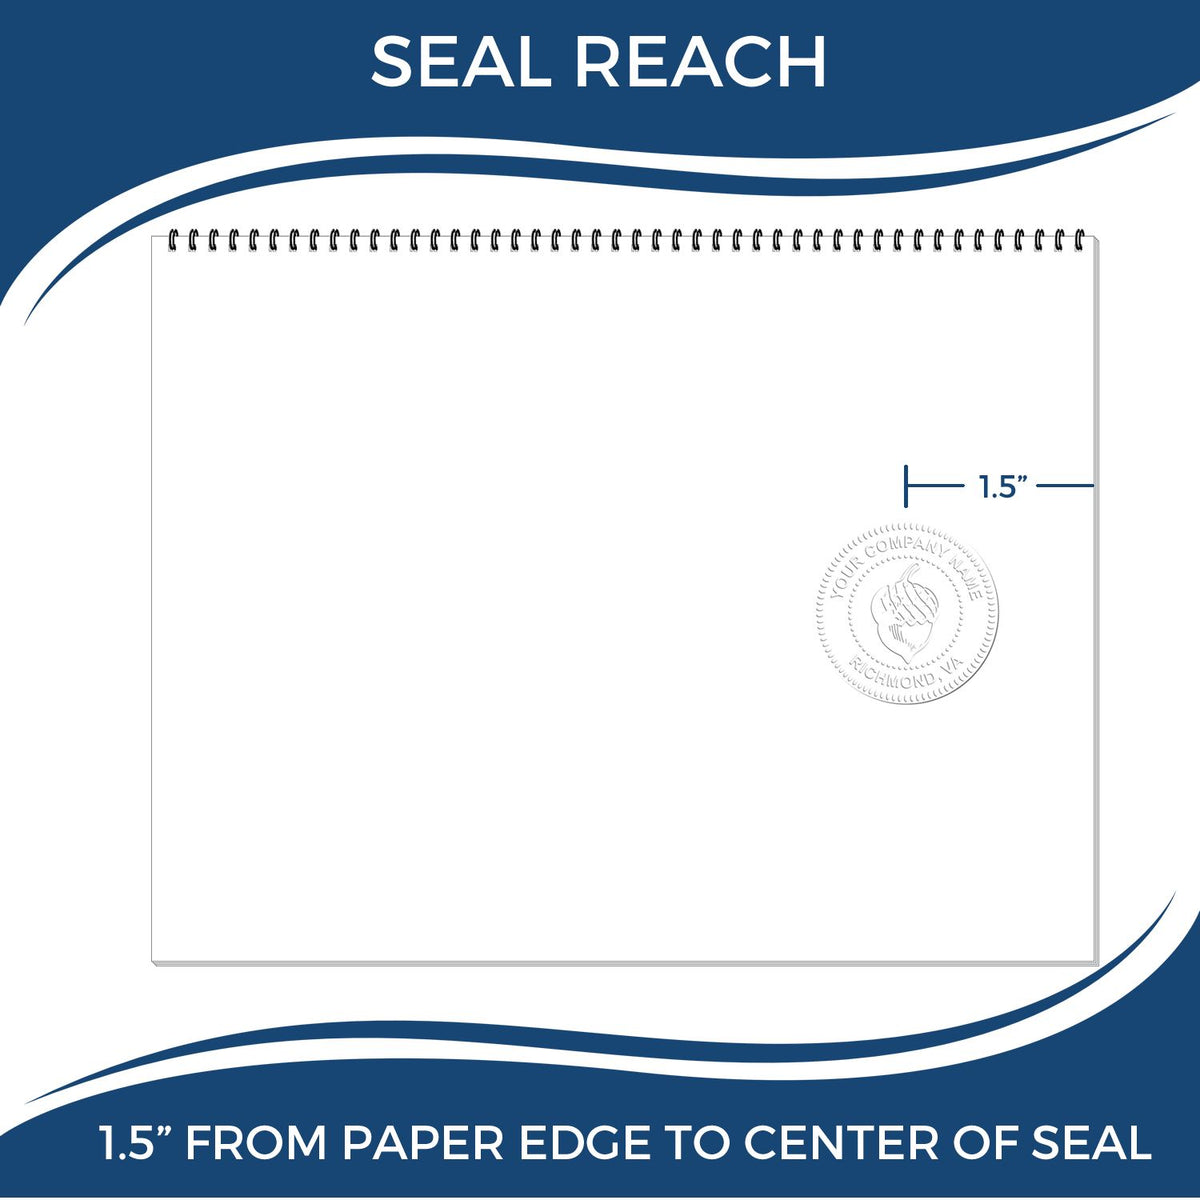 An infographic showing the seal reach which is represented by a ruler and a miniature seal image of the Handheld Oklahoma Professional Geologist Embosser